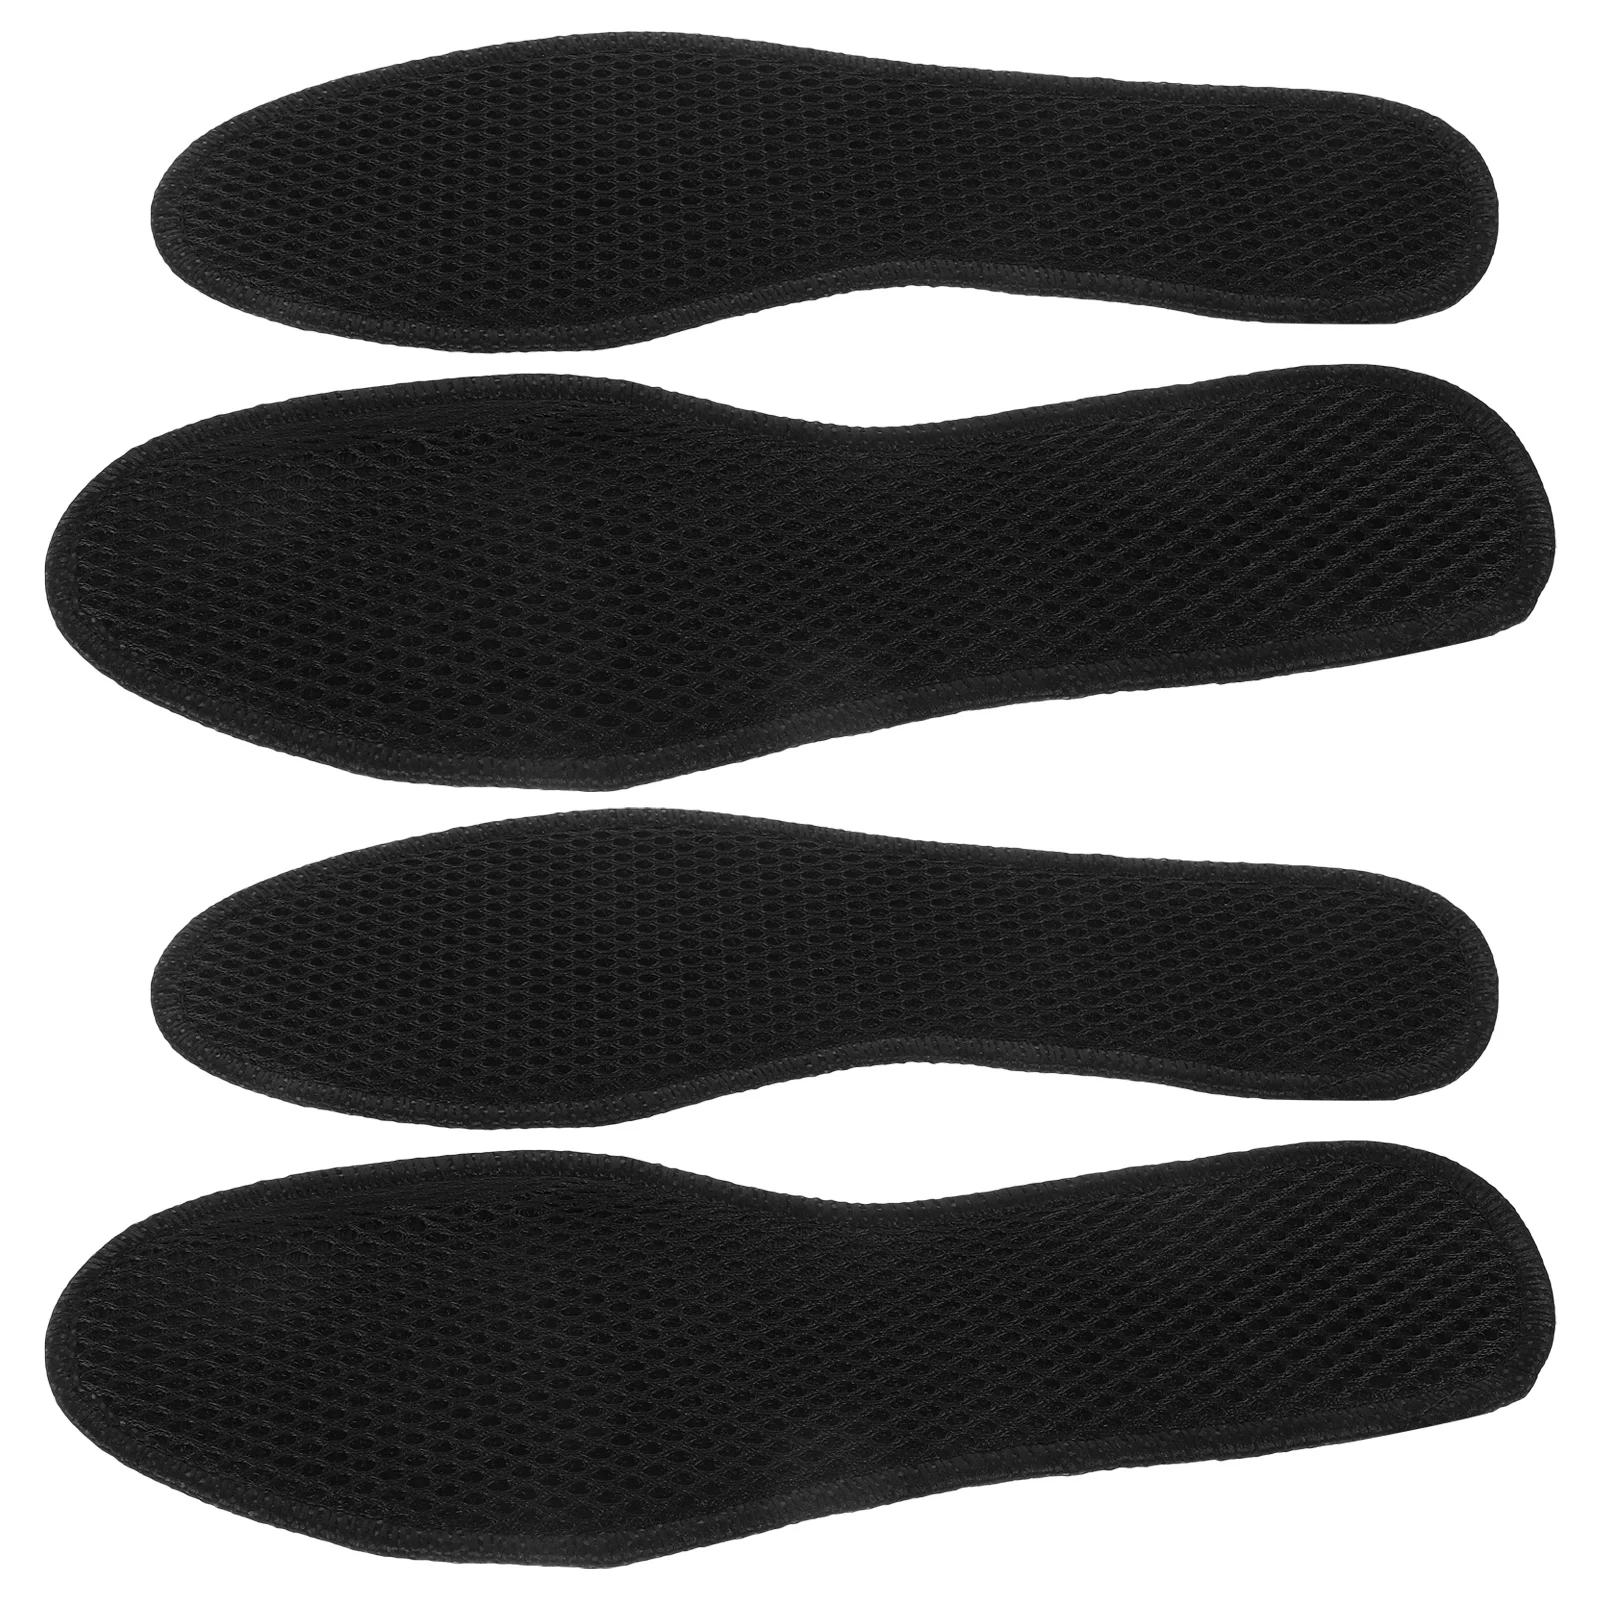 

2 Pairs of Charcoal Shoe Insoles Odor Fighting Insoles Wetness and Odor Absorbing Shoe Liner Absorb Sweat Insoles for Men and